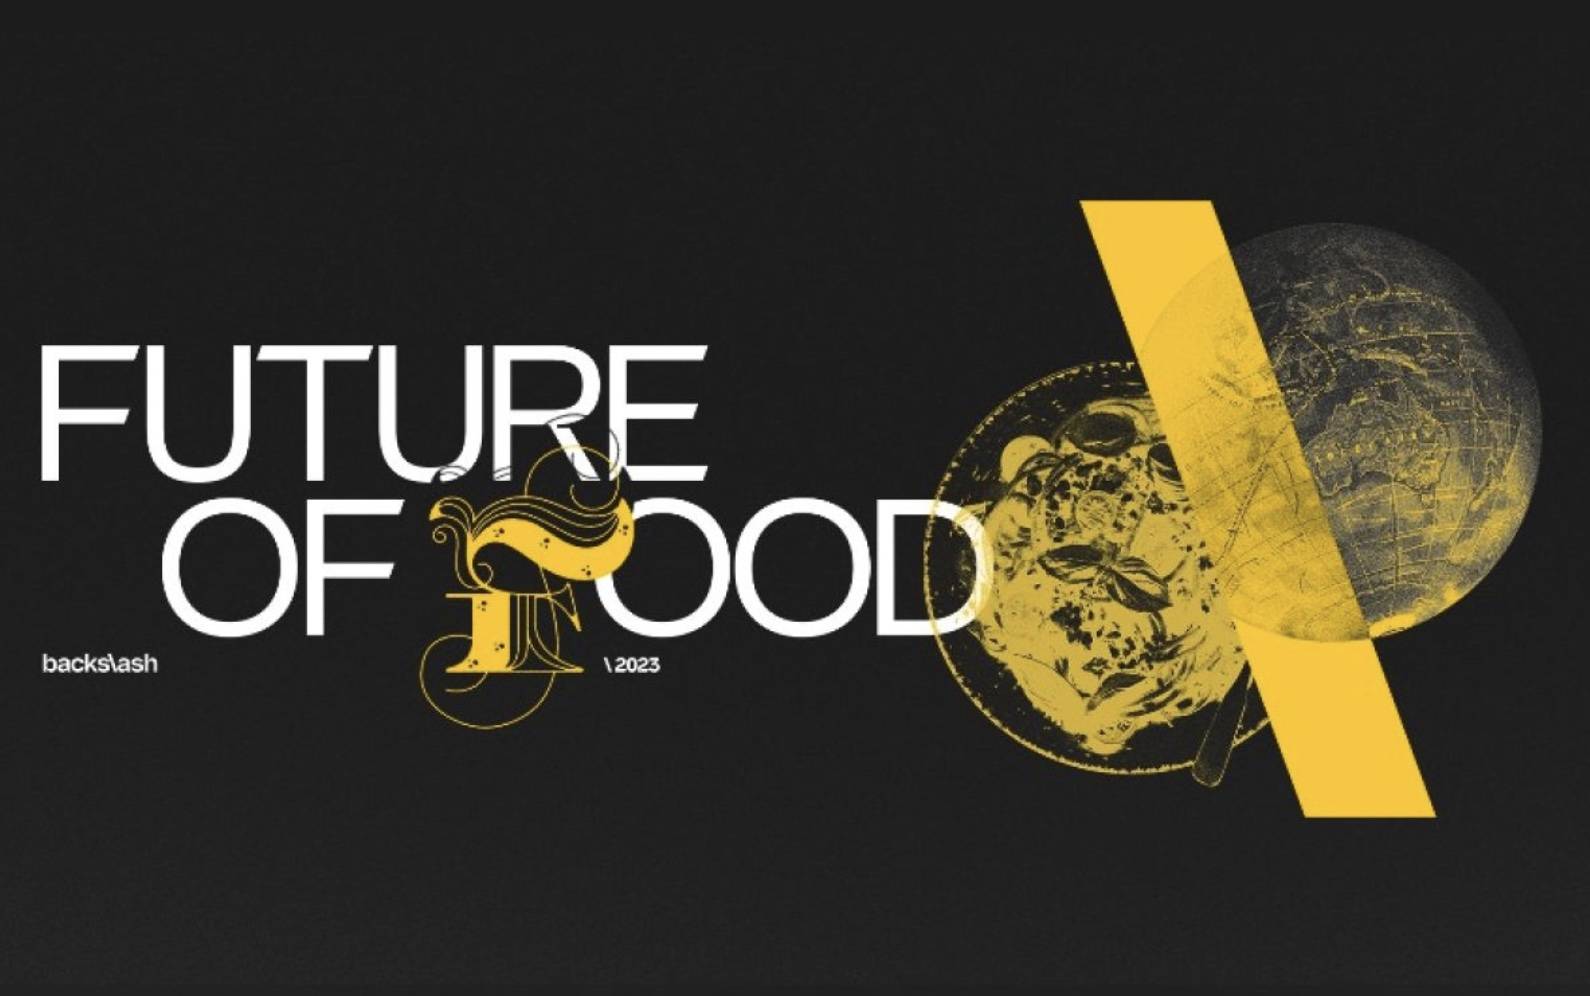 Black background with white copy that reads "Future of Food", next to it is a yellow backlash over two traces of a globe